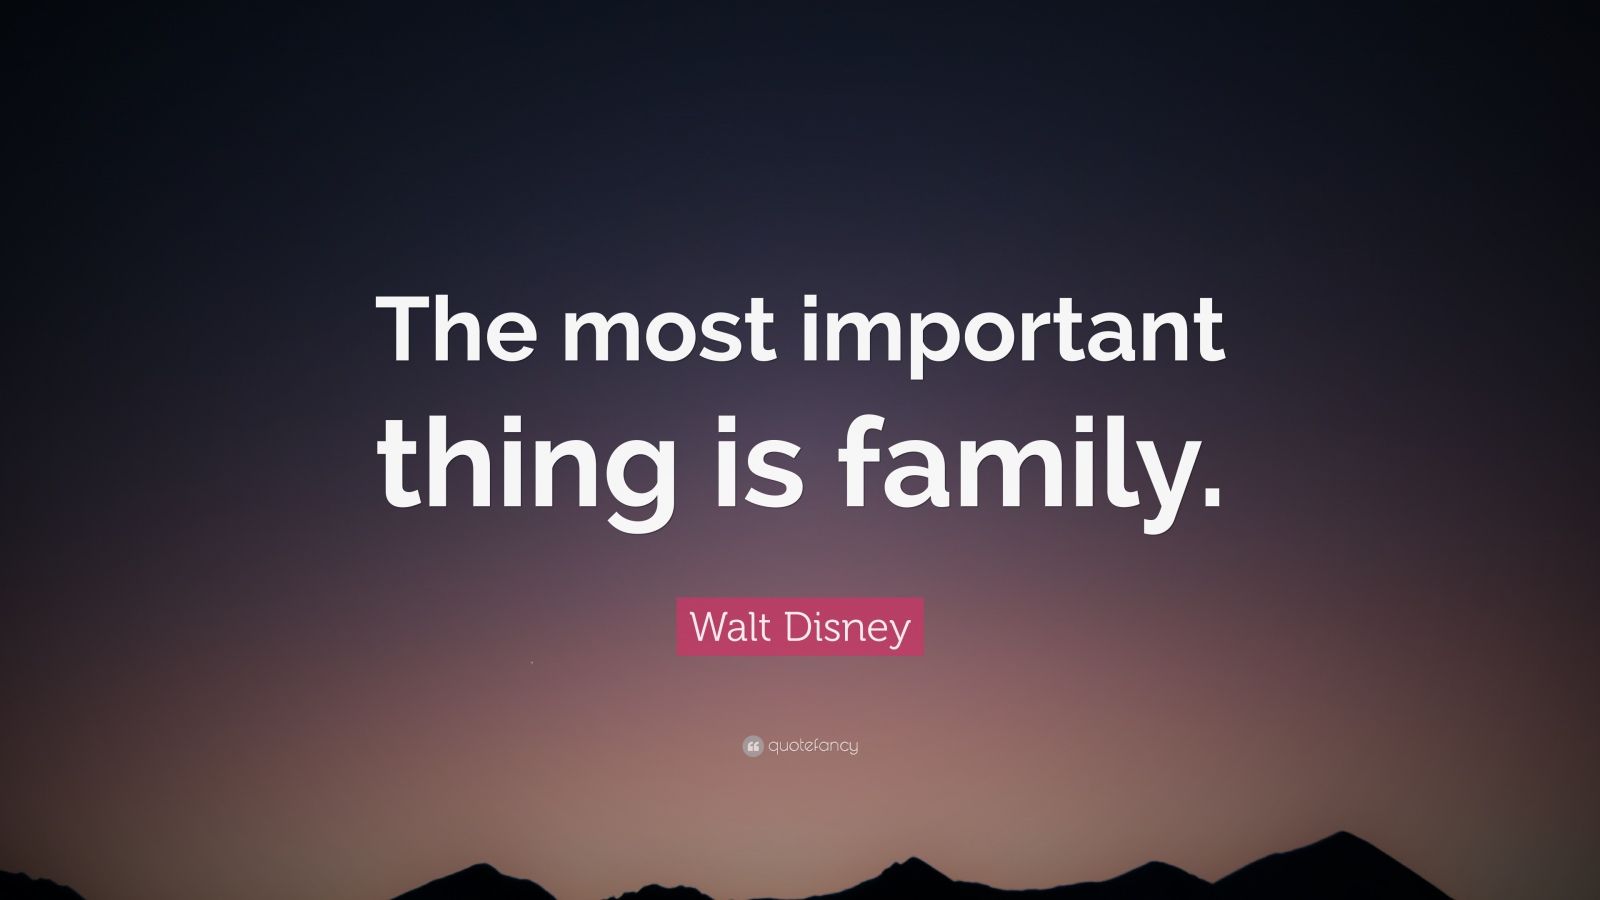 Walt Disney Quote: “The most important thing is family.” (12 wallpapers